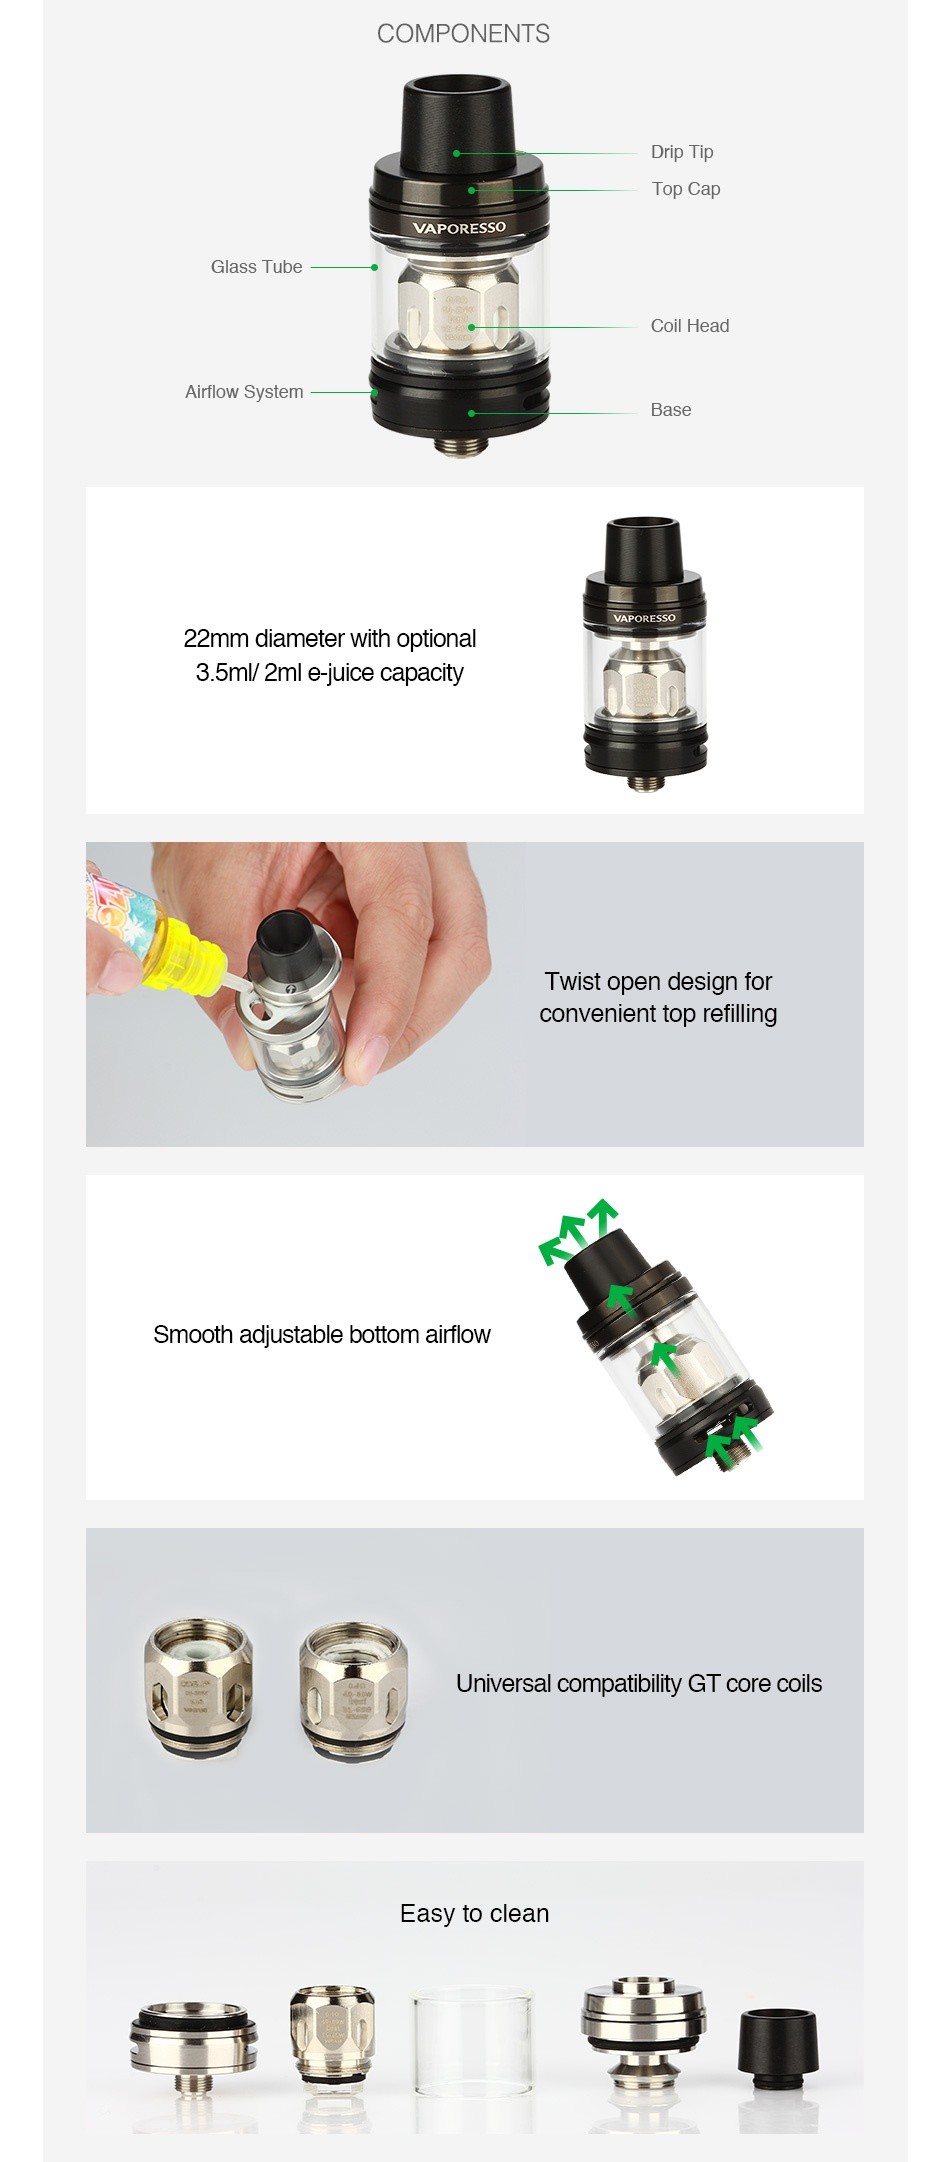 Vaporesso NRG SE Tank 2ml/3.5ml COMPONENTS Drip Ti ass ube Coil Head Airflow System 22mm diameter with optional 3 5m 2ml e juice capacity TWist open desig convenient top retiling smooth adjustable bottom airflow Universal compatibility GT core coils Easy to clean